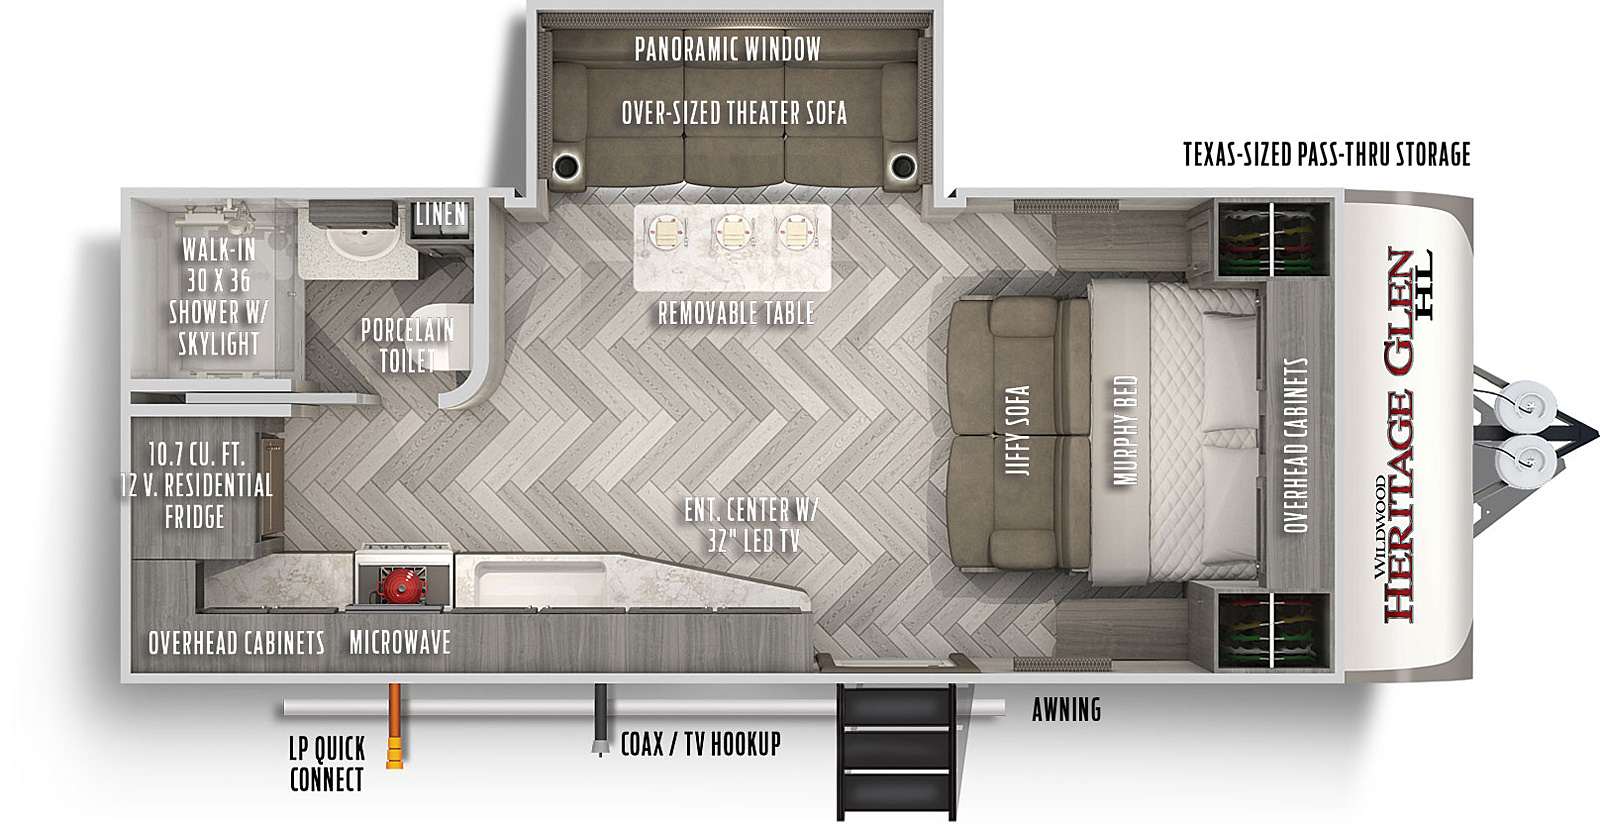 Heritage Glen Hyper-Lyte 17RBHL floorplan. The 17RBHL has one slide out and one entry door.